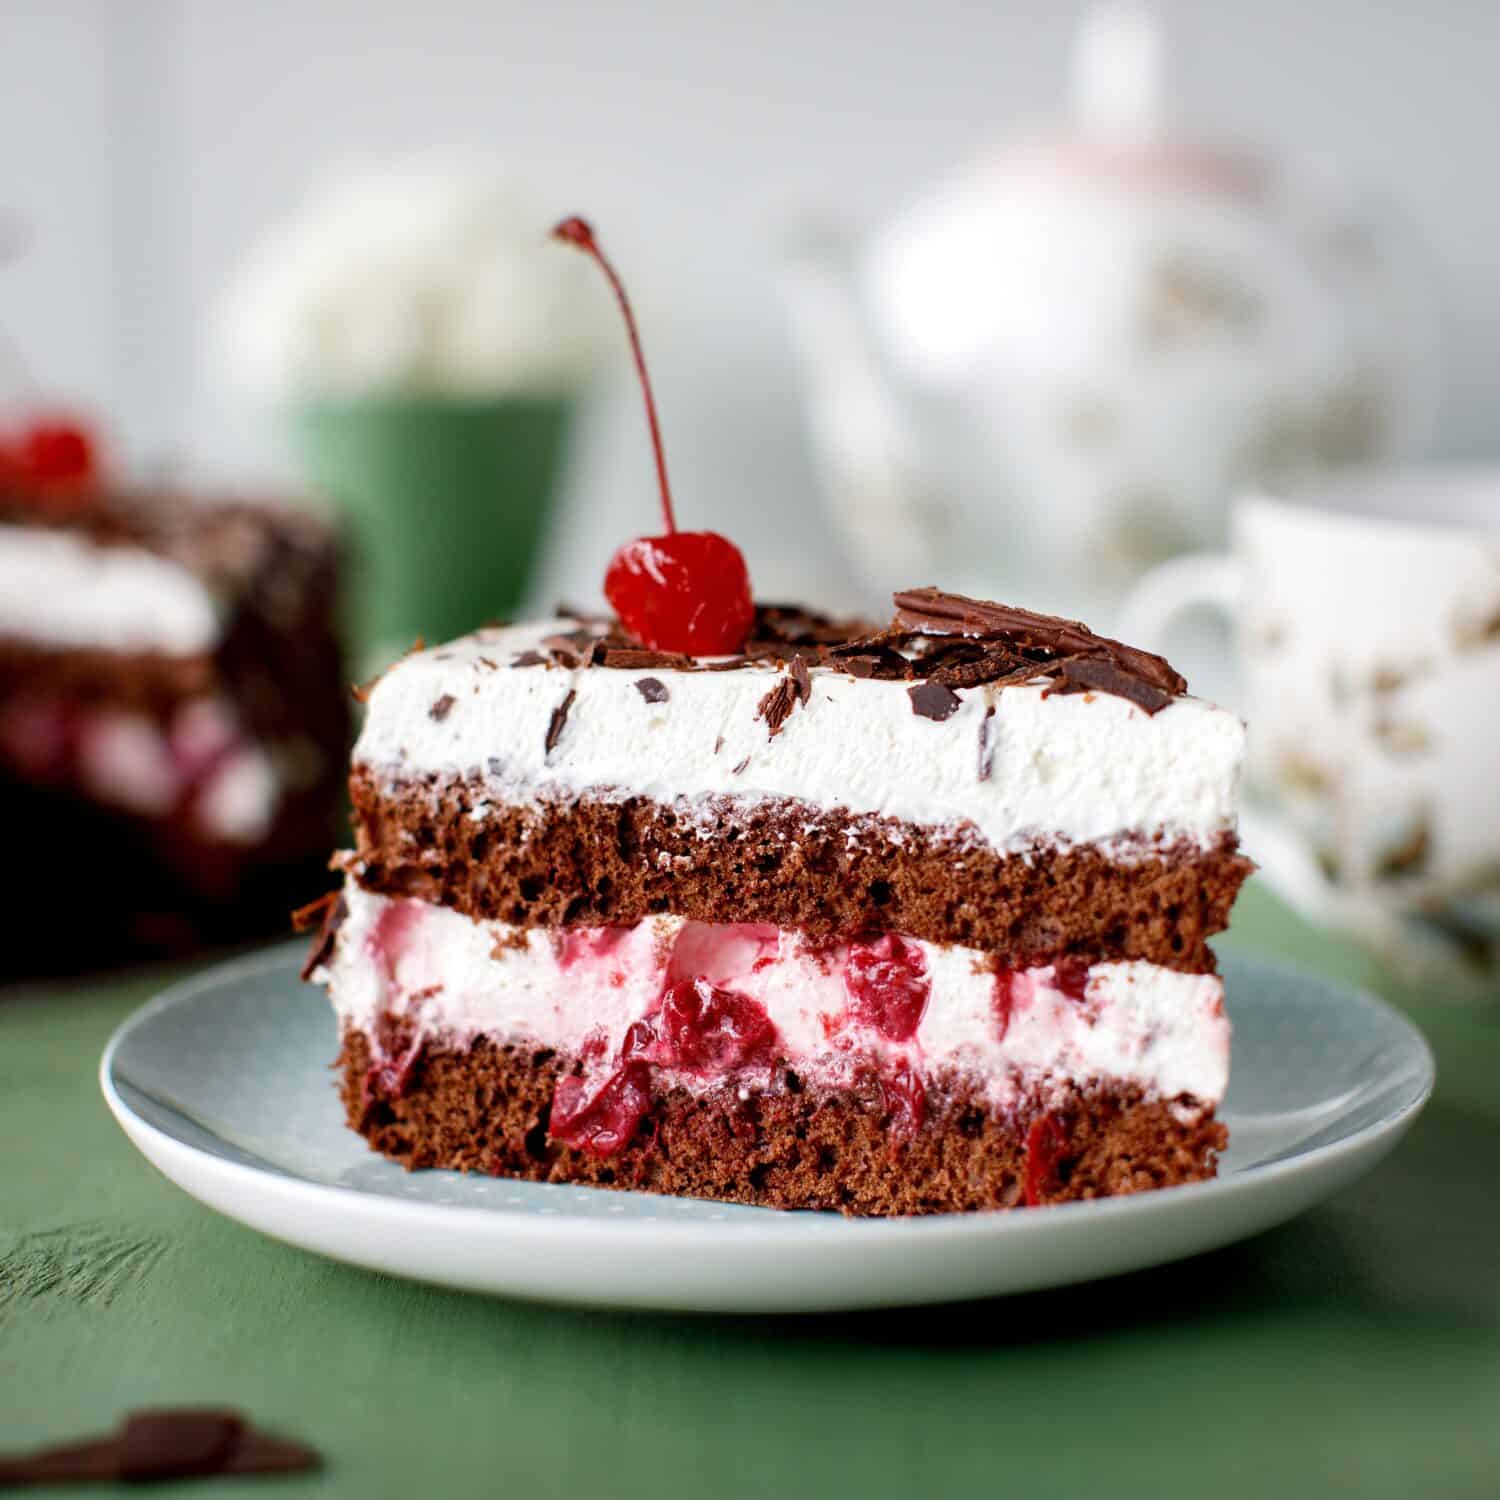 Cherry cake and chocolate on the background with flowers